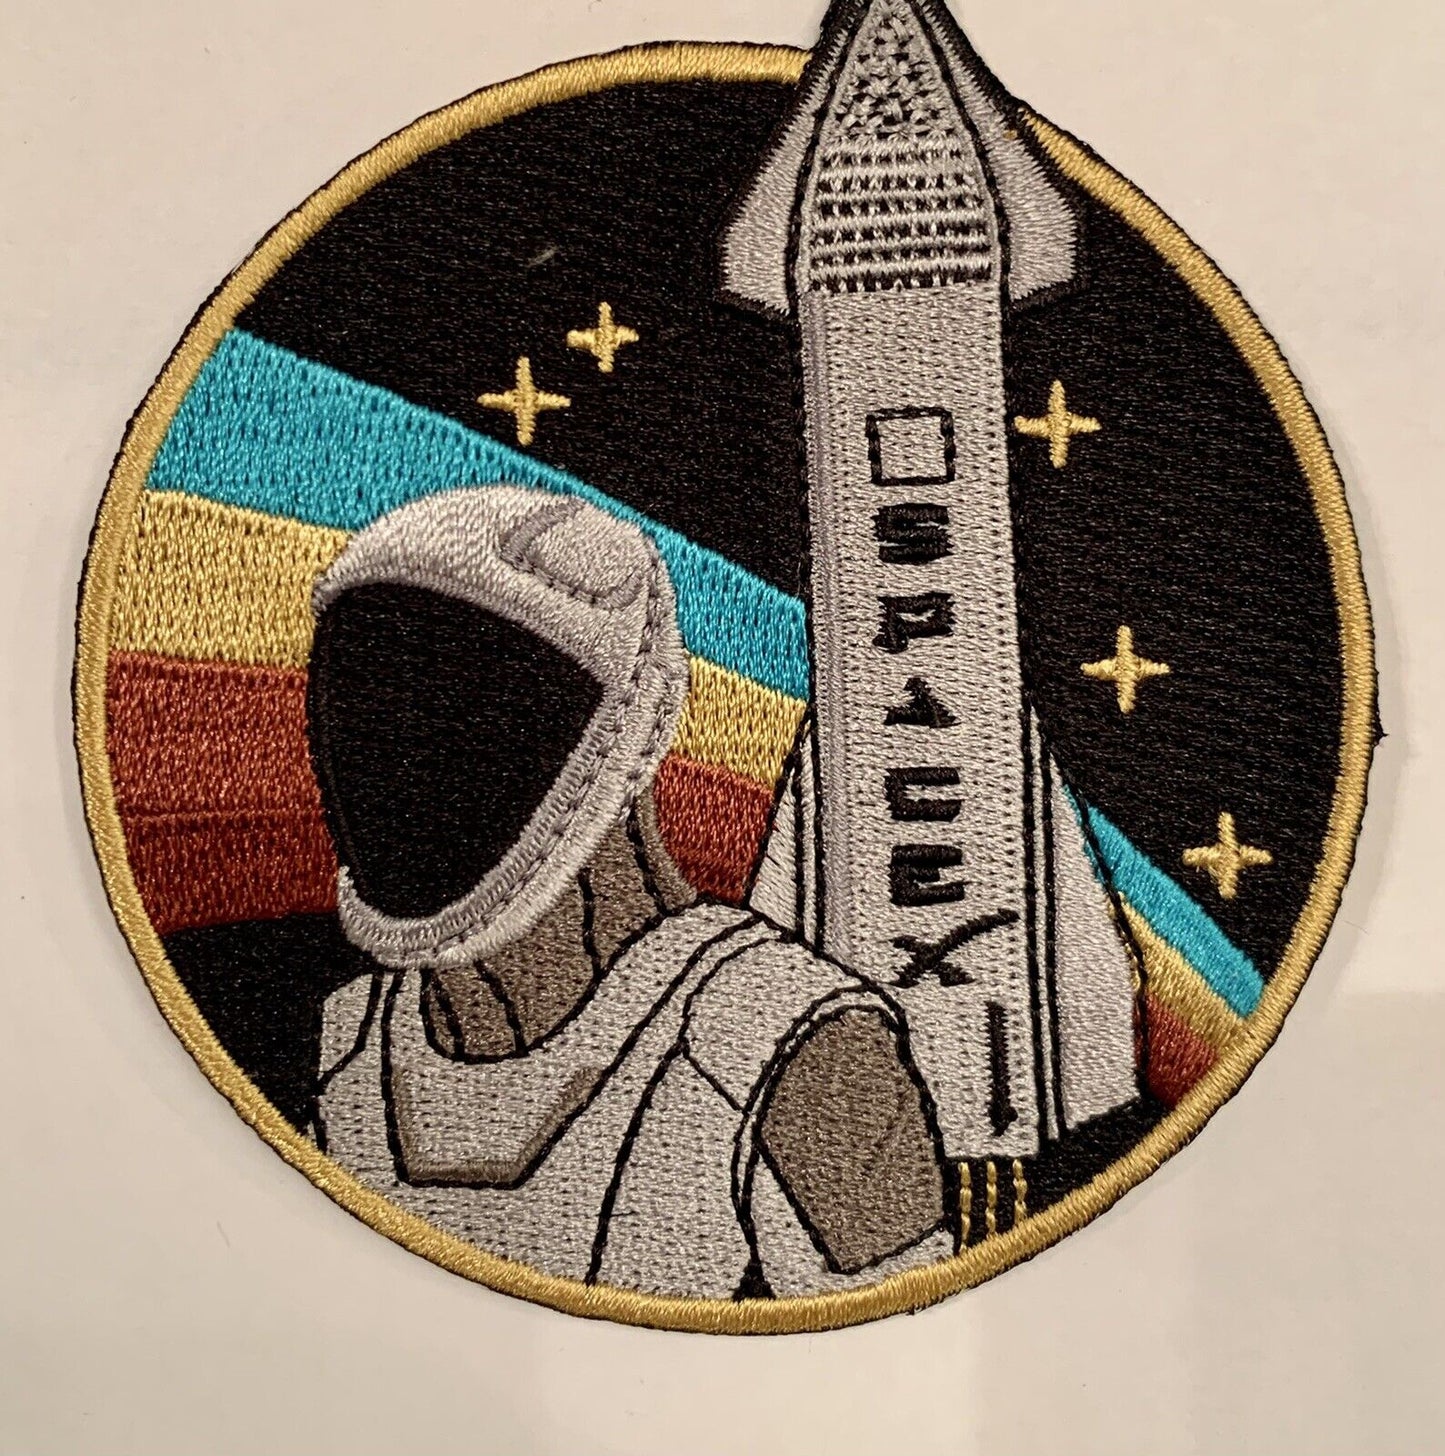 Original SpaceX ASTRONAUT AND STARSHIP - The Astronaut Patch 3.5” NASA ISS Falco